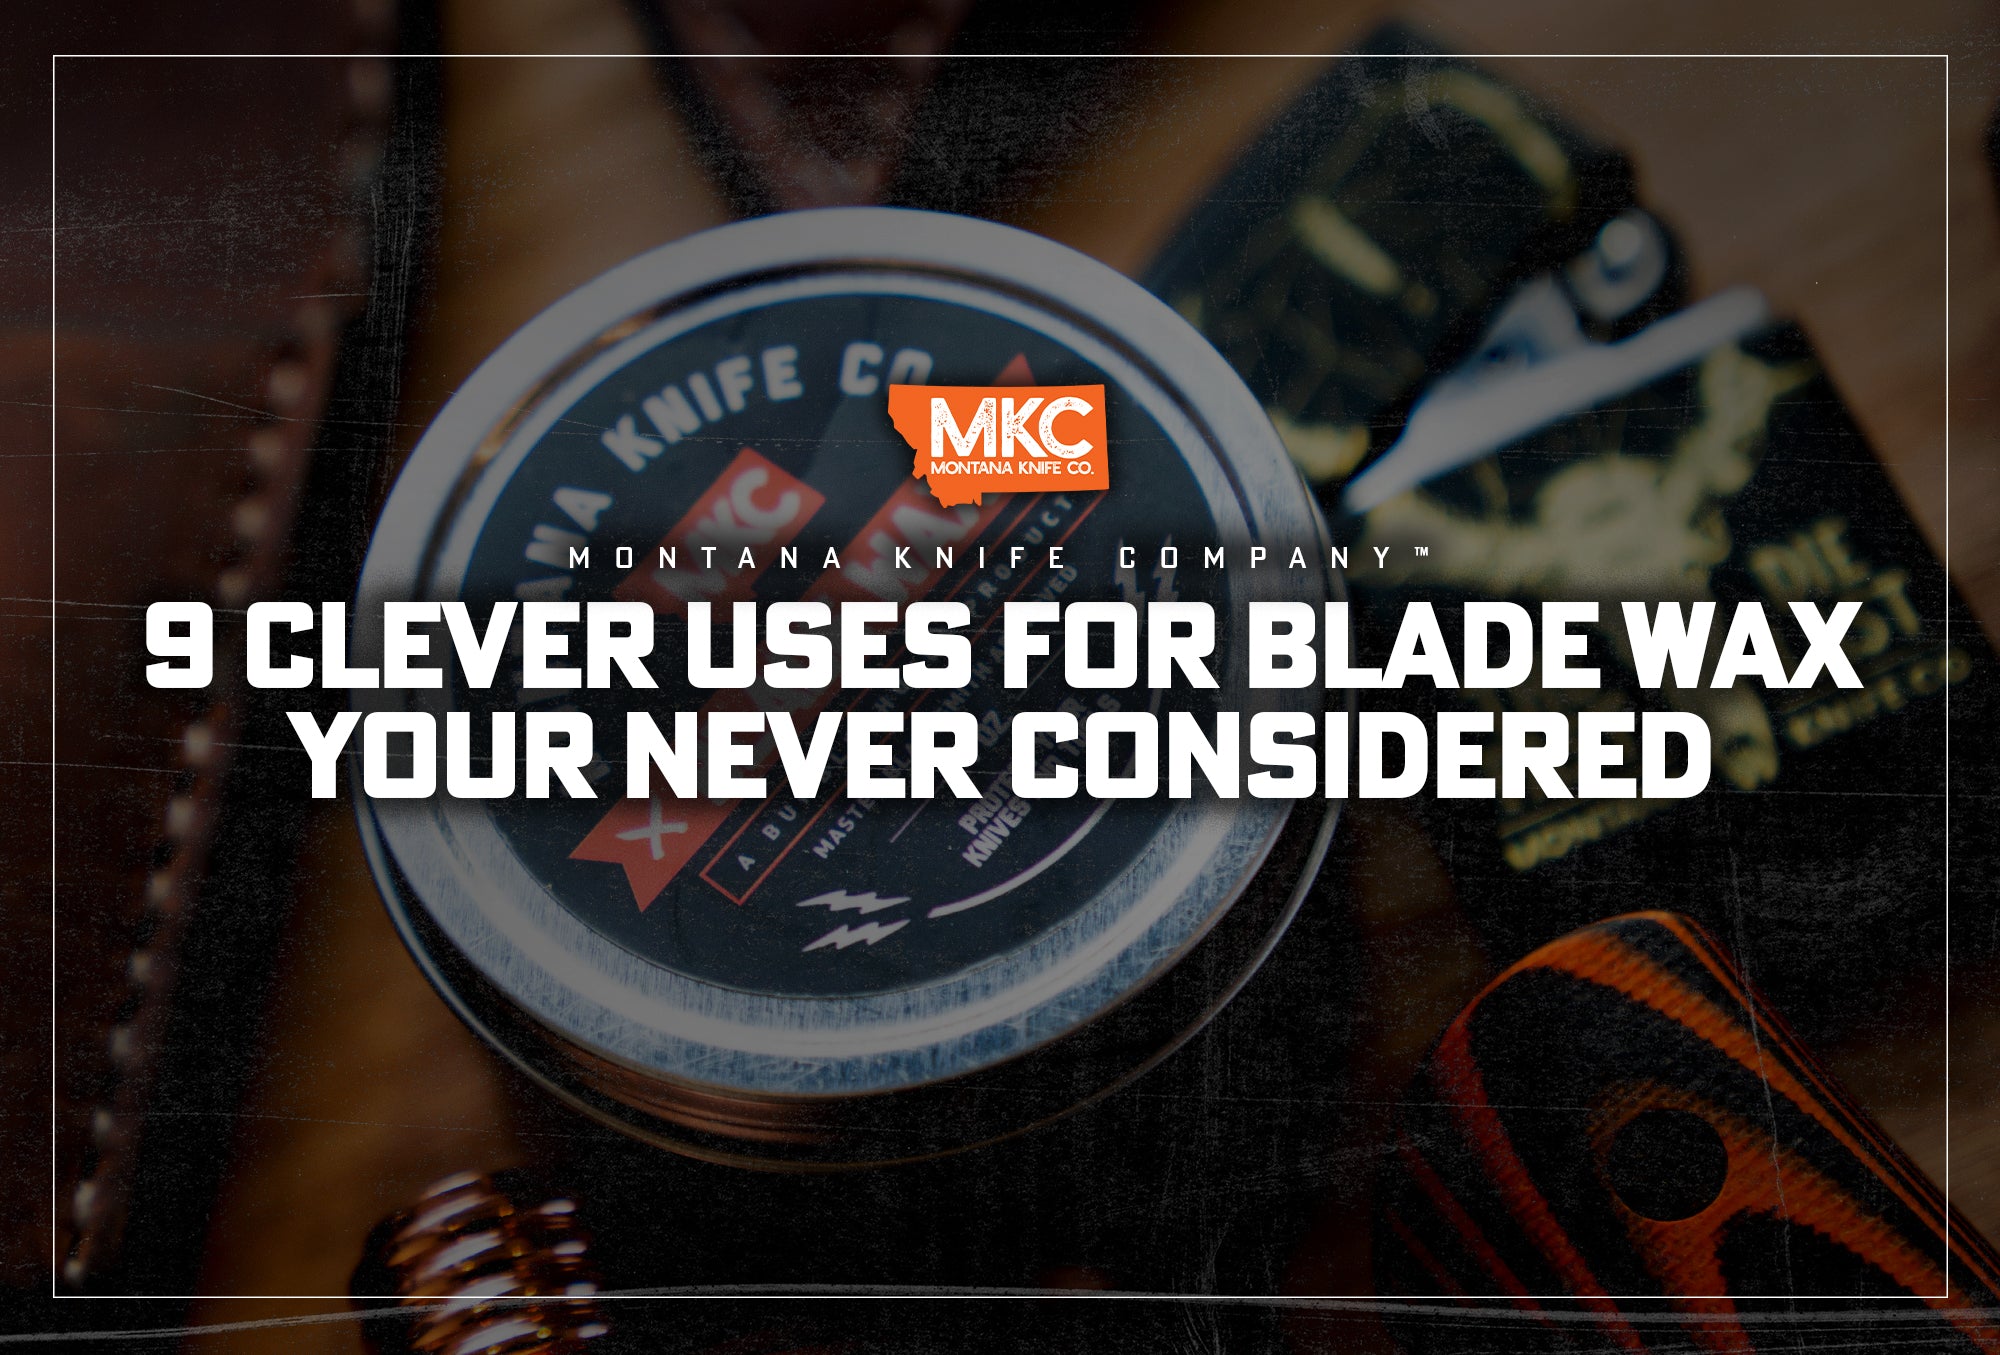 9 Clever Uses for Blade Wax You Never Considered